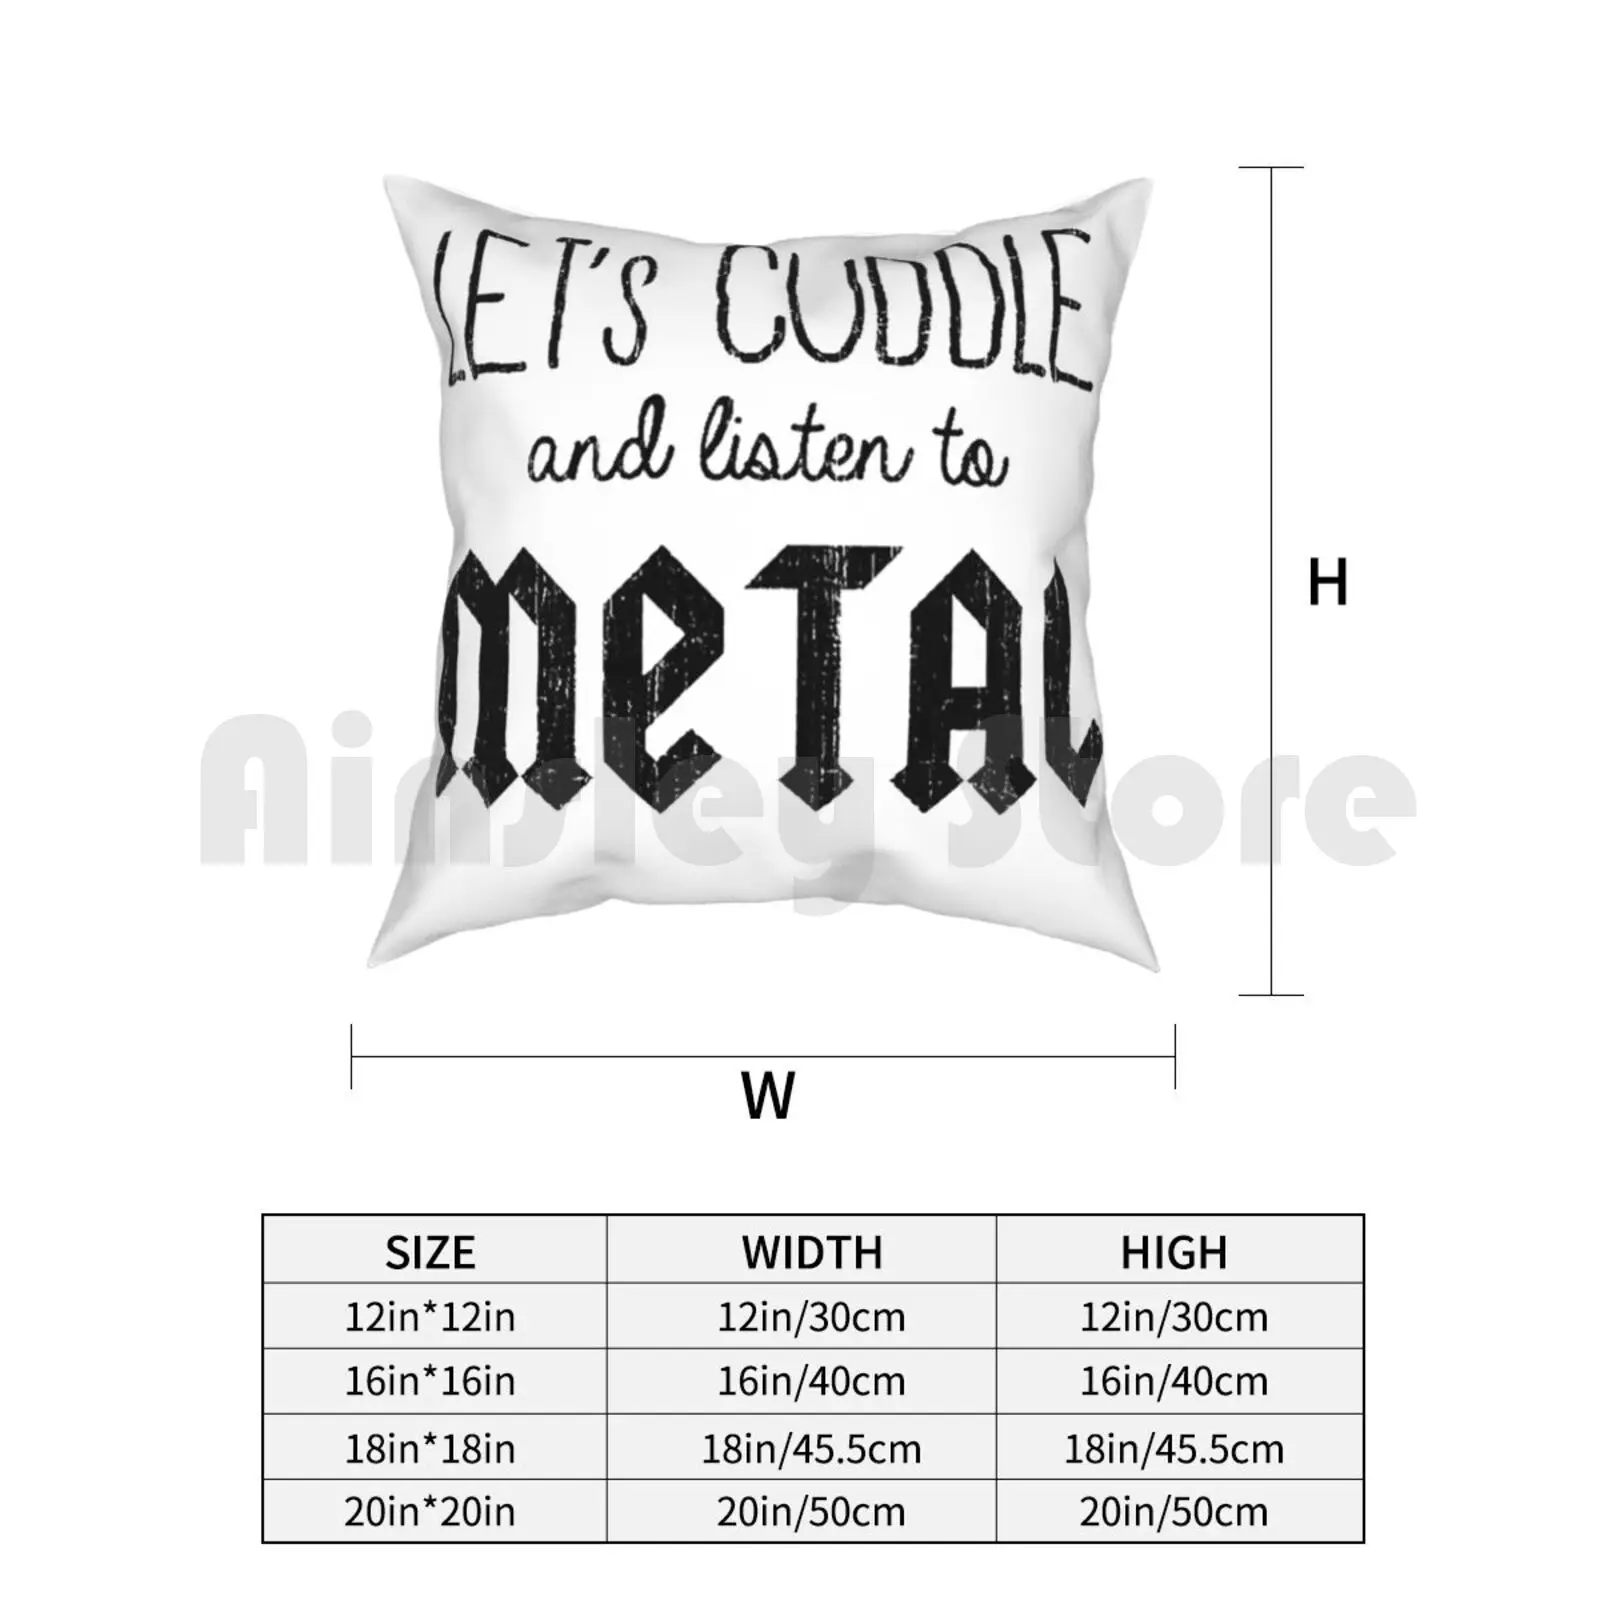 https://ae01.alicdn.com/kf/H7ffc24bea9524c08bdd6fb0b7537c4afI/Let-S-Cuddle-And-Listen-To-Metal-Pillow-Case-Printed-Home-Soft-Throw-Pillow-Metal-Music.jpg